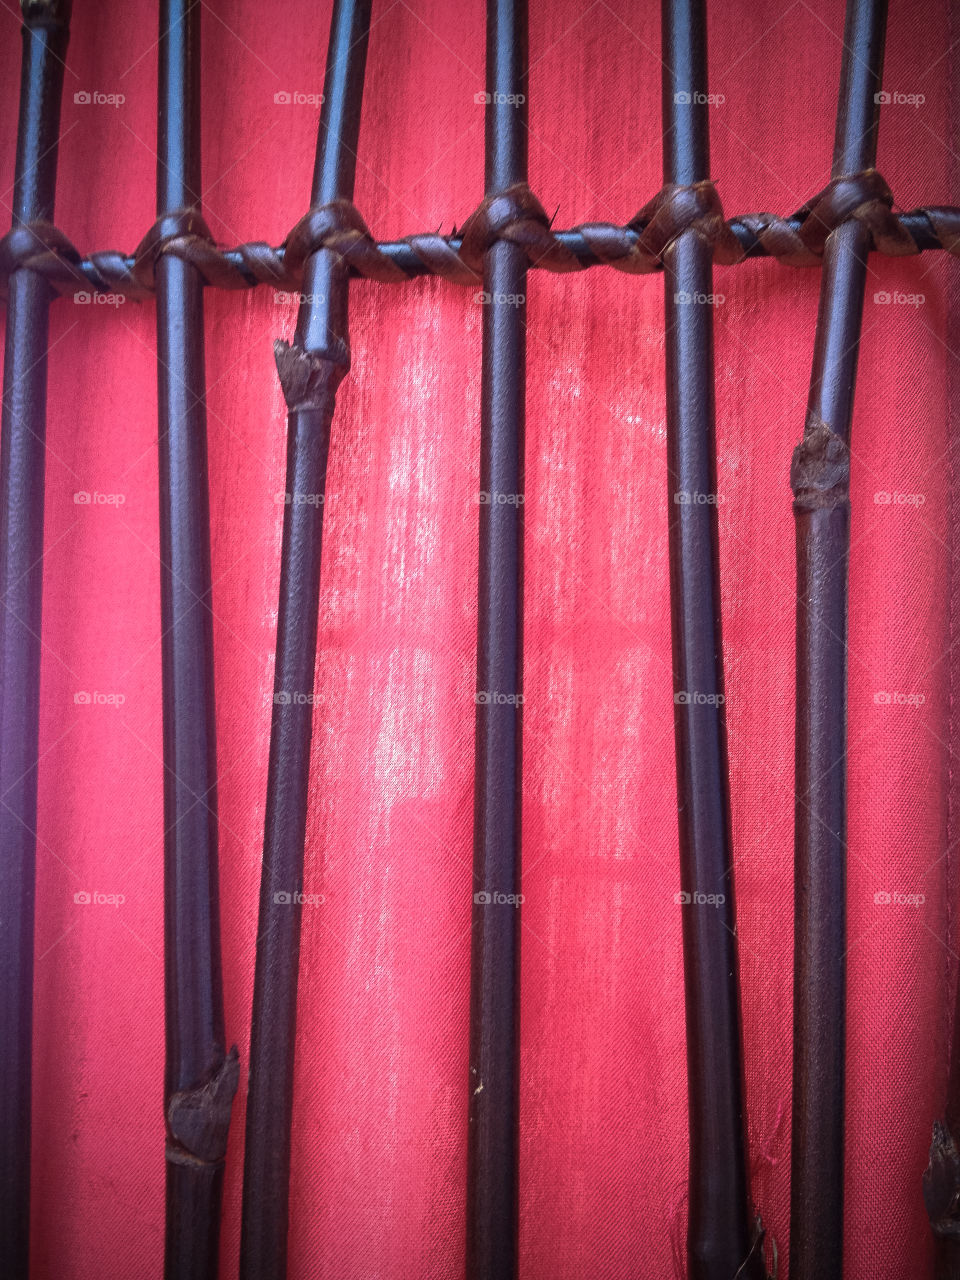 Bamboo fence with red background